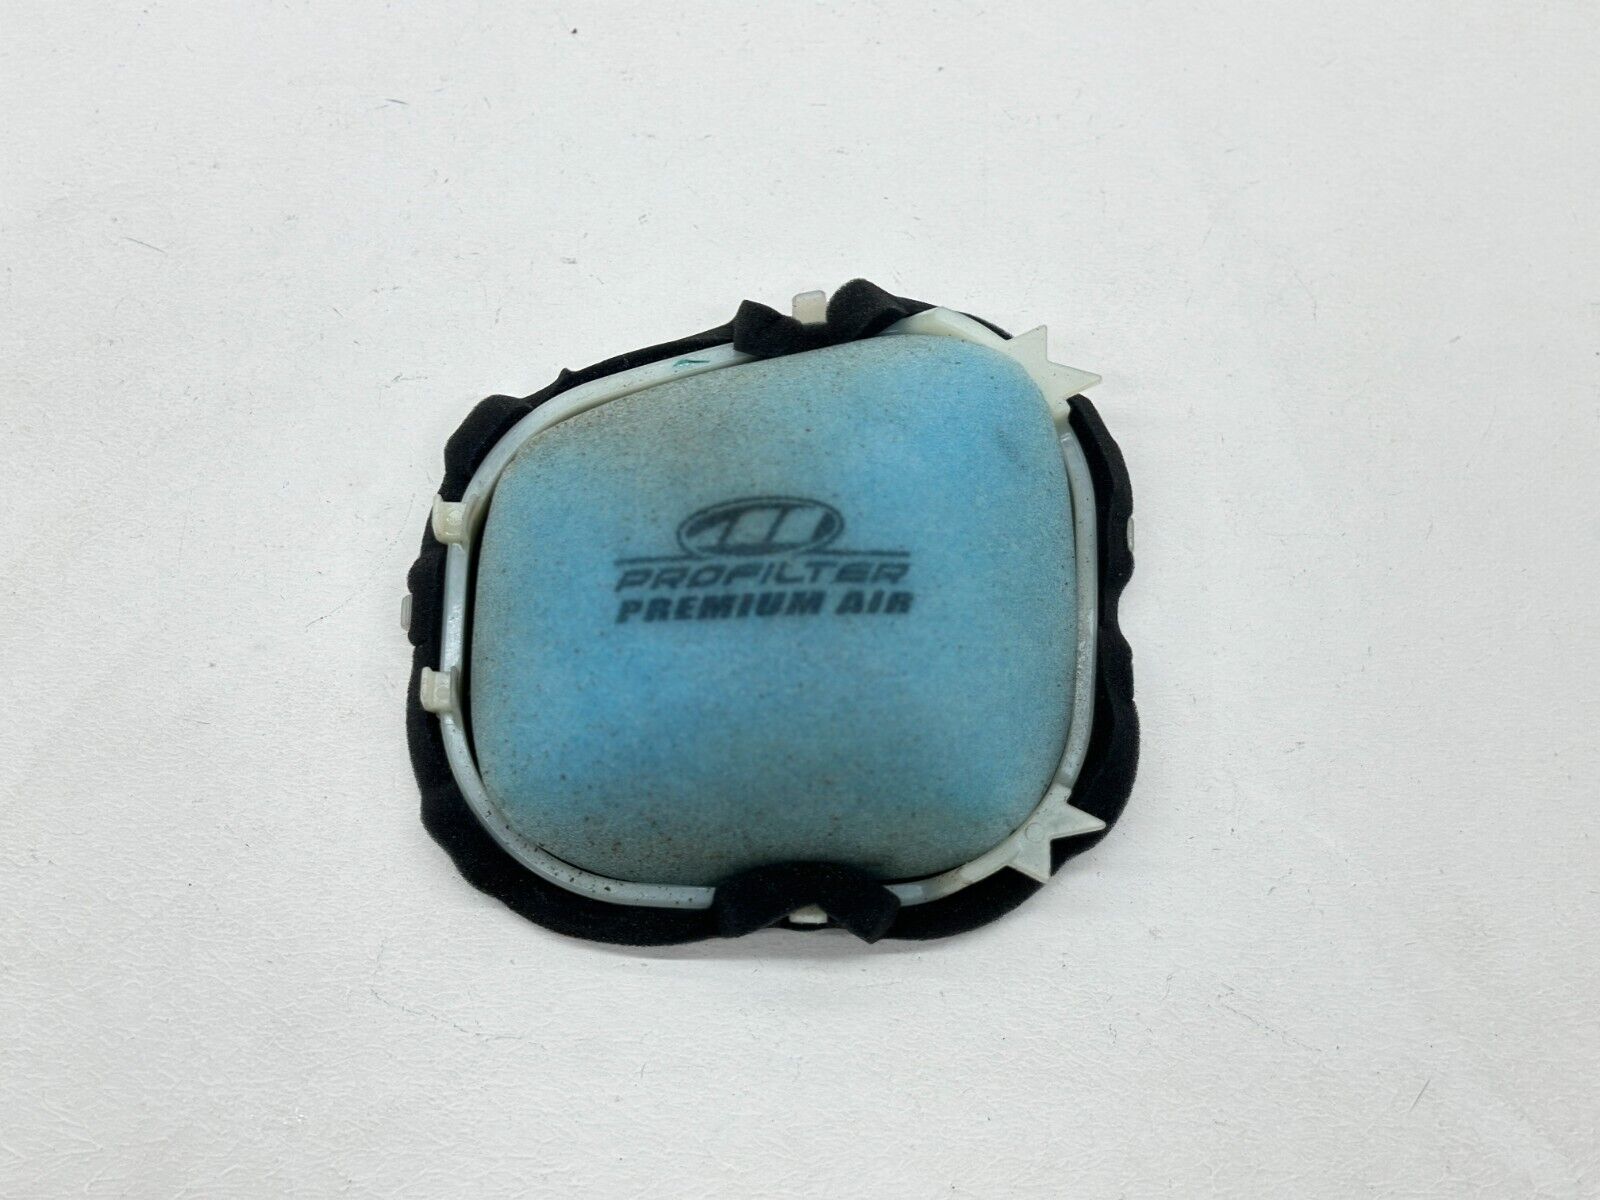 2022 Honda CRF450R Pro Filter Cage Air Filter Screen Cleaner Airfilter CRF 450R